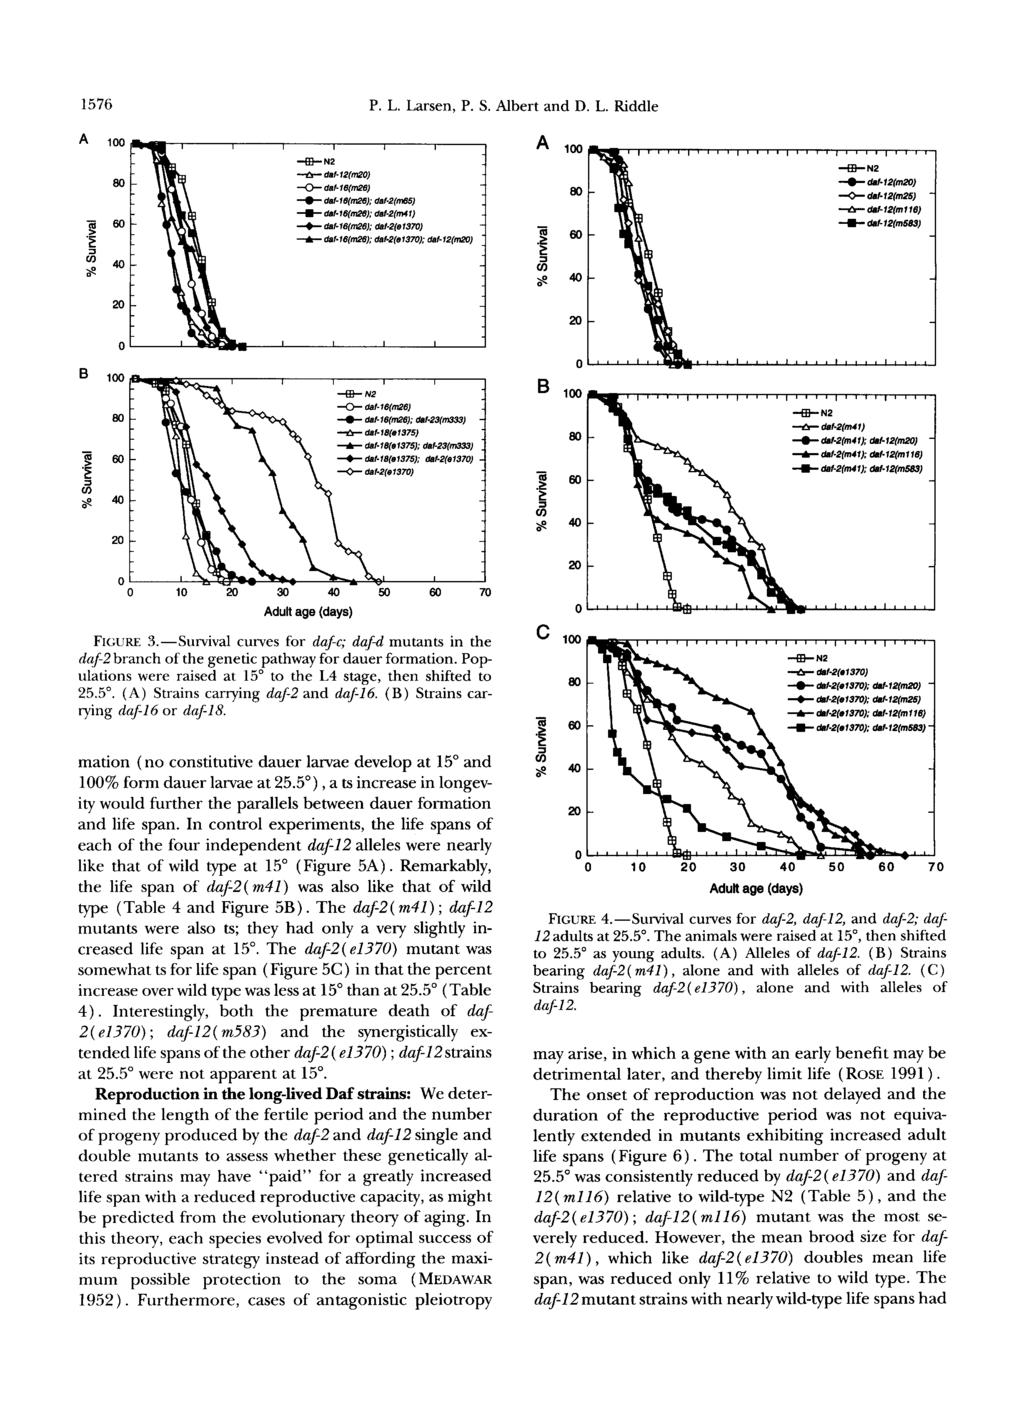 1576 P. L. Larsen, P. S. and Albert D. L. Riddle Adult age (days) FIGURE J.--Survival curves for daf-c; dafd mutants in the duf-2 branch of the genetic pathway for dauer formation.